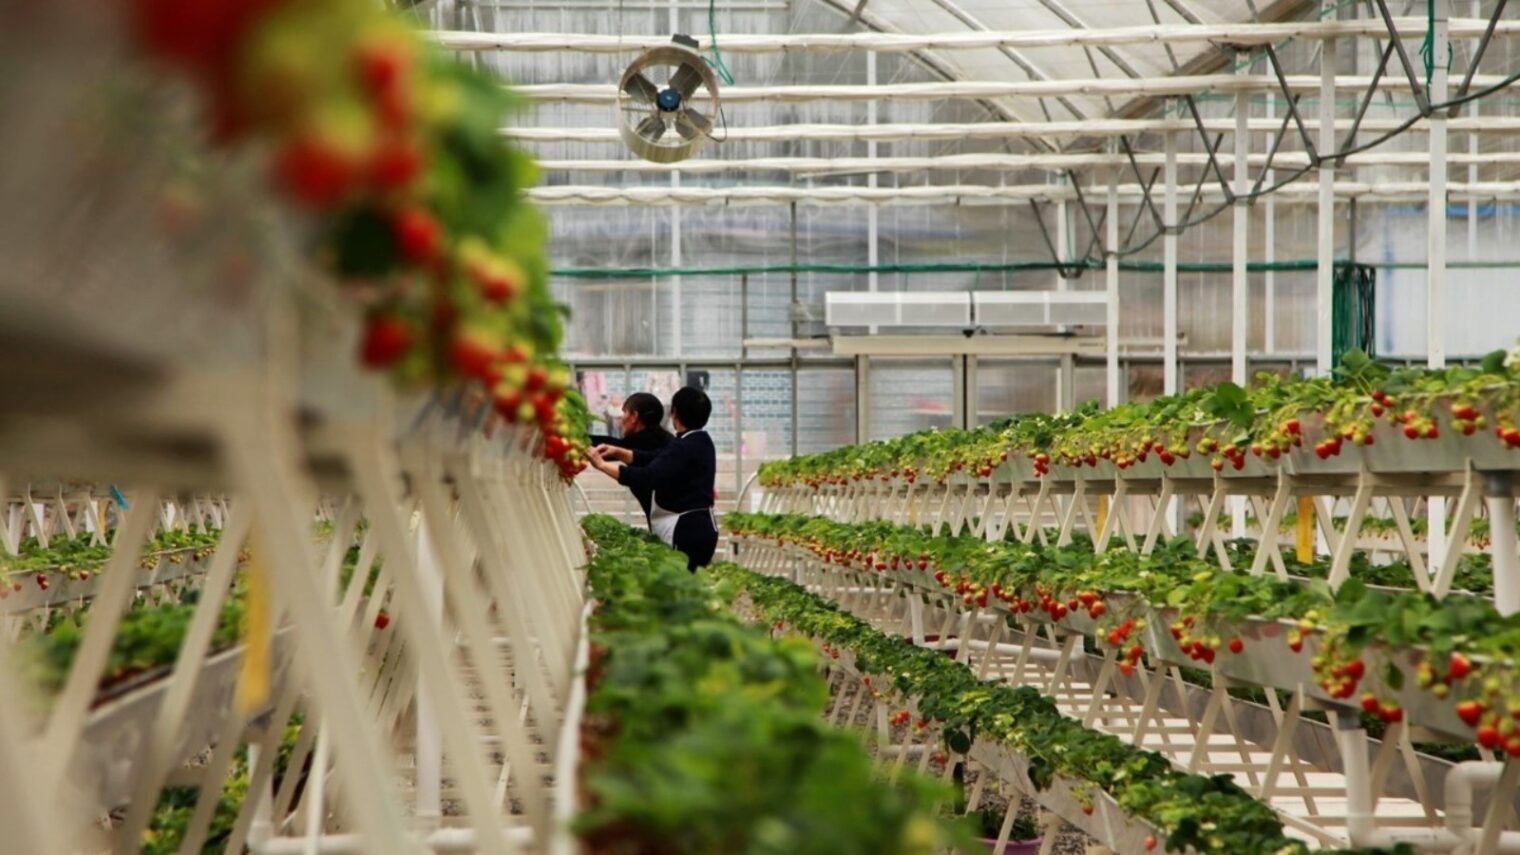 A pick-yourself strawberry farm in China built inside an Azrom greenhouse. Photo courtesy of Azrom